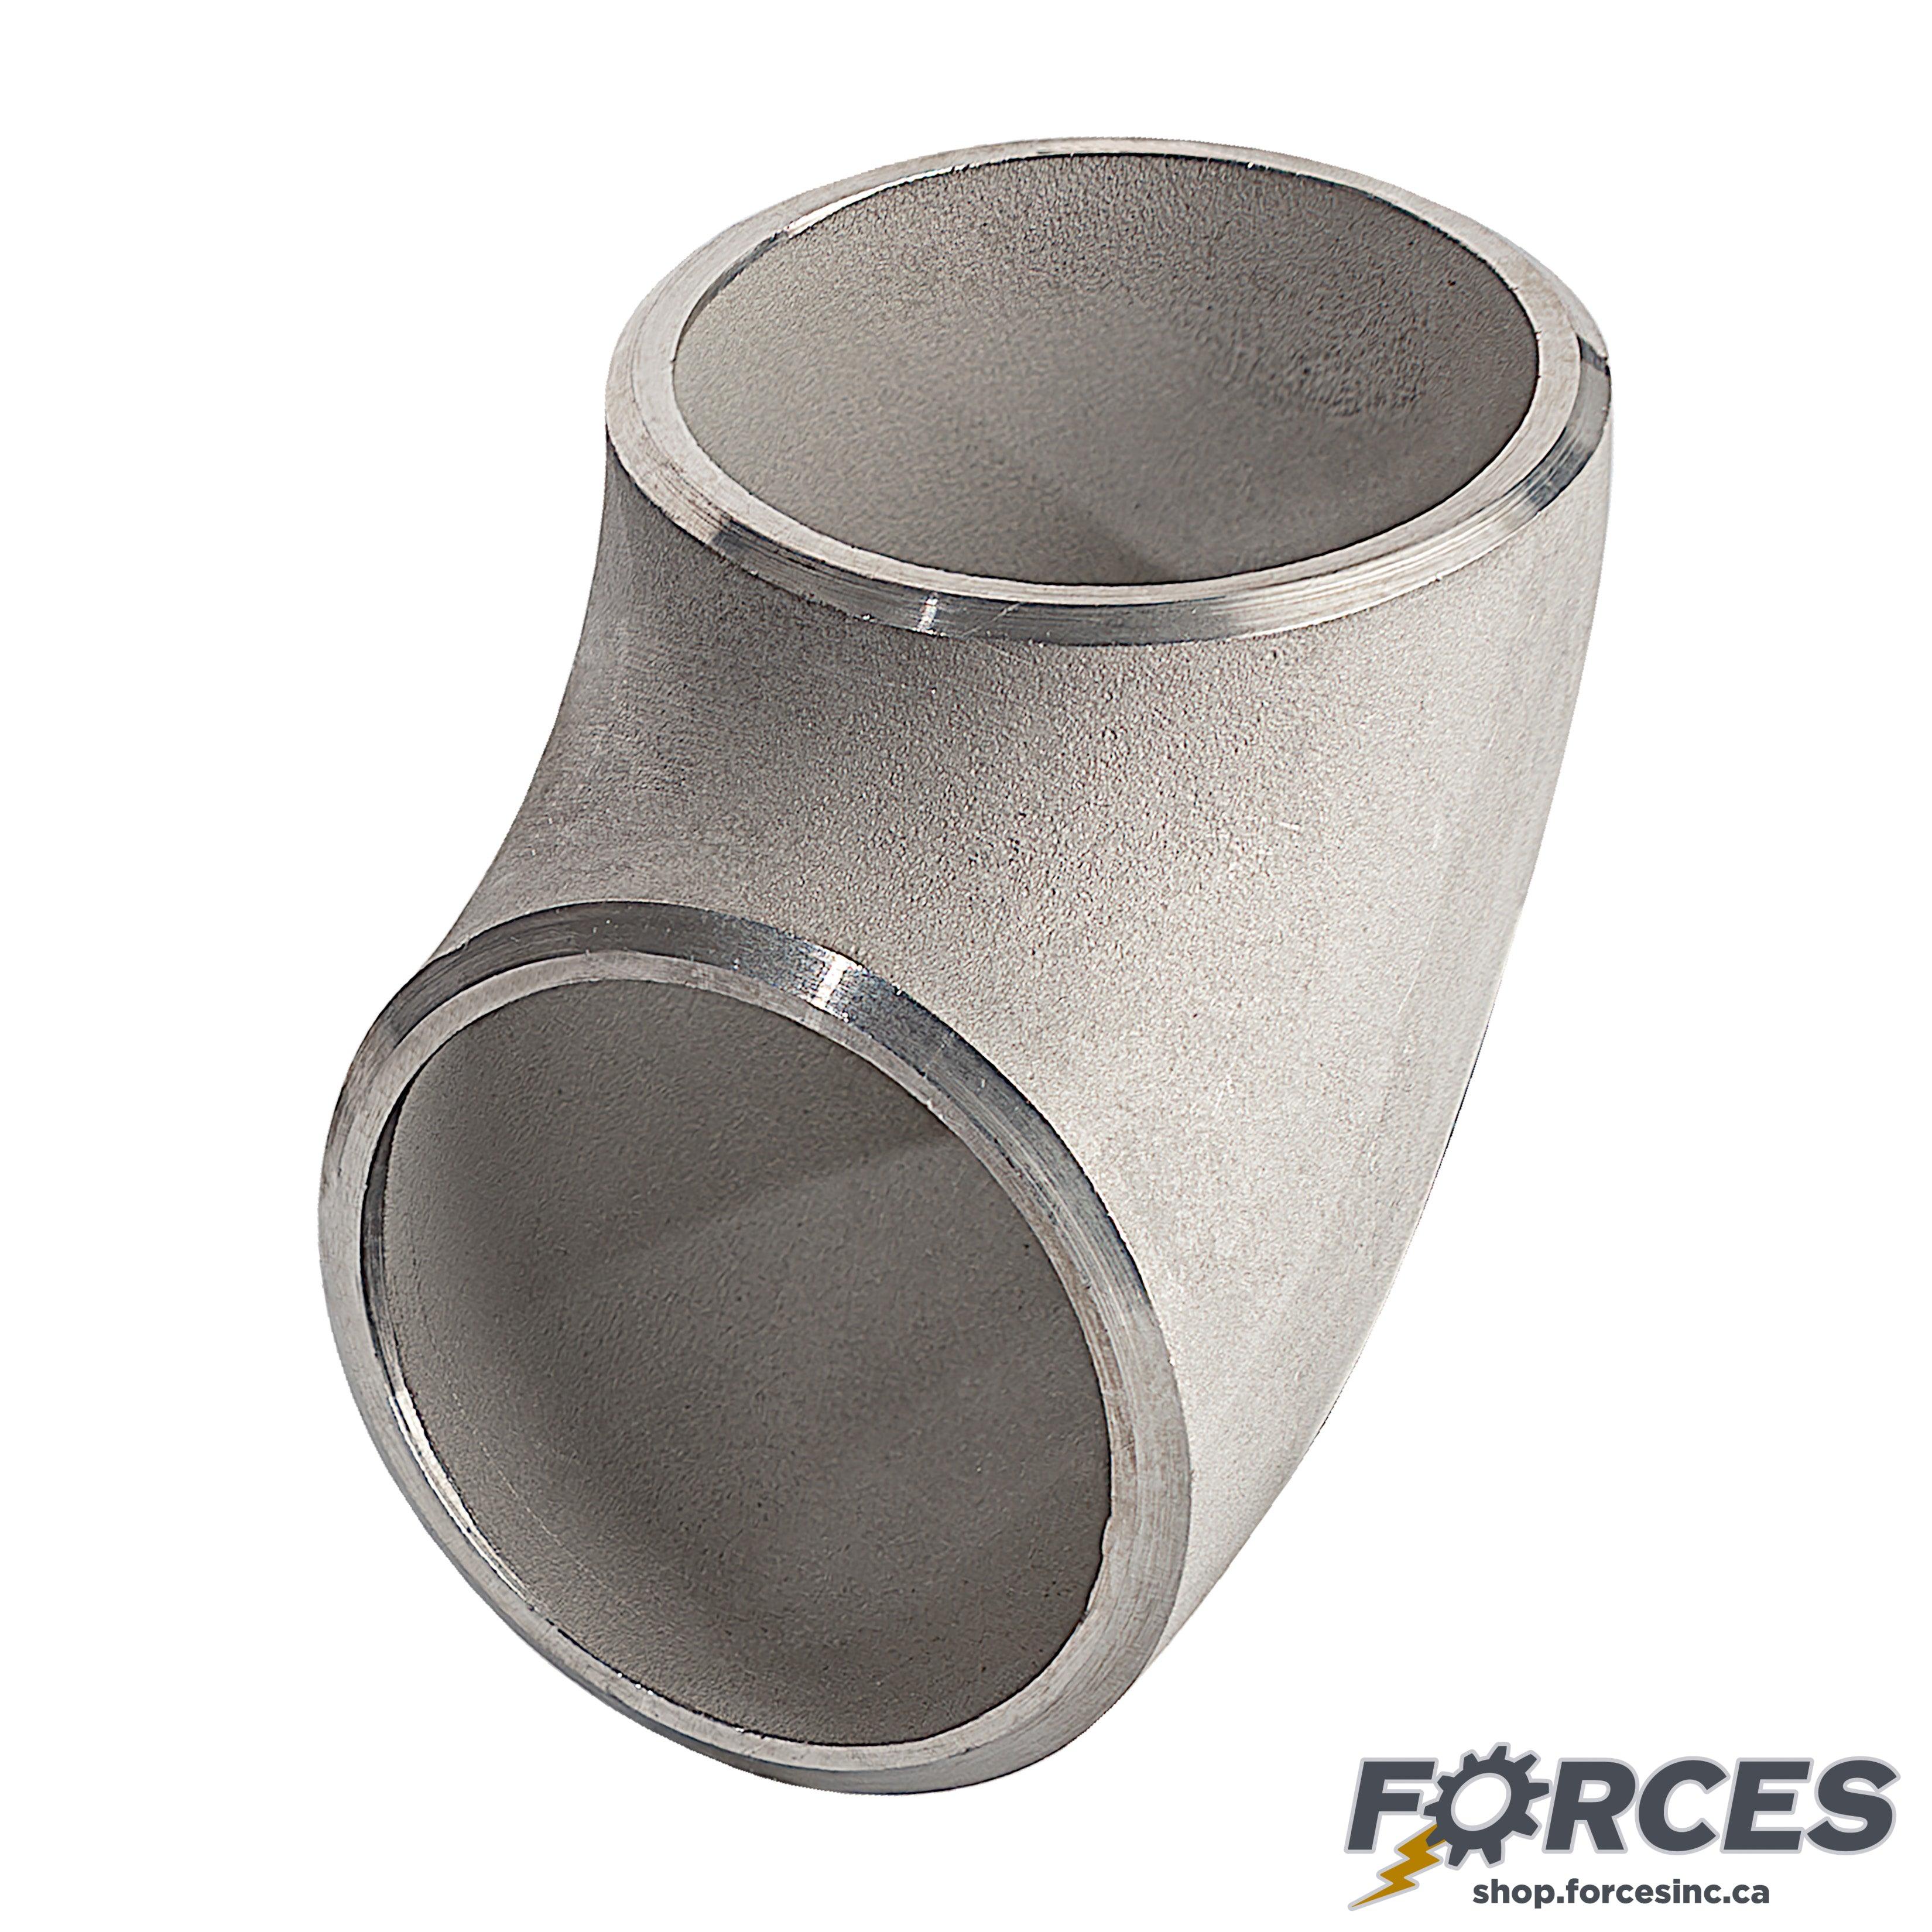 1/2" Elbow 45° SCH 10 Butt Weld - Stainless Steel 316 - Forces Inc